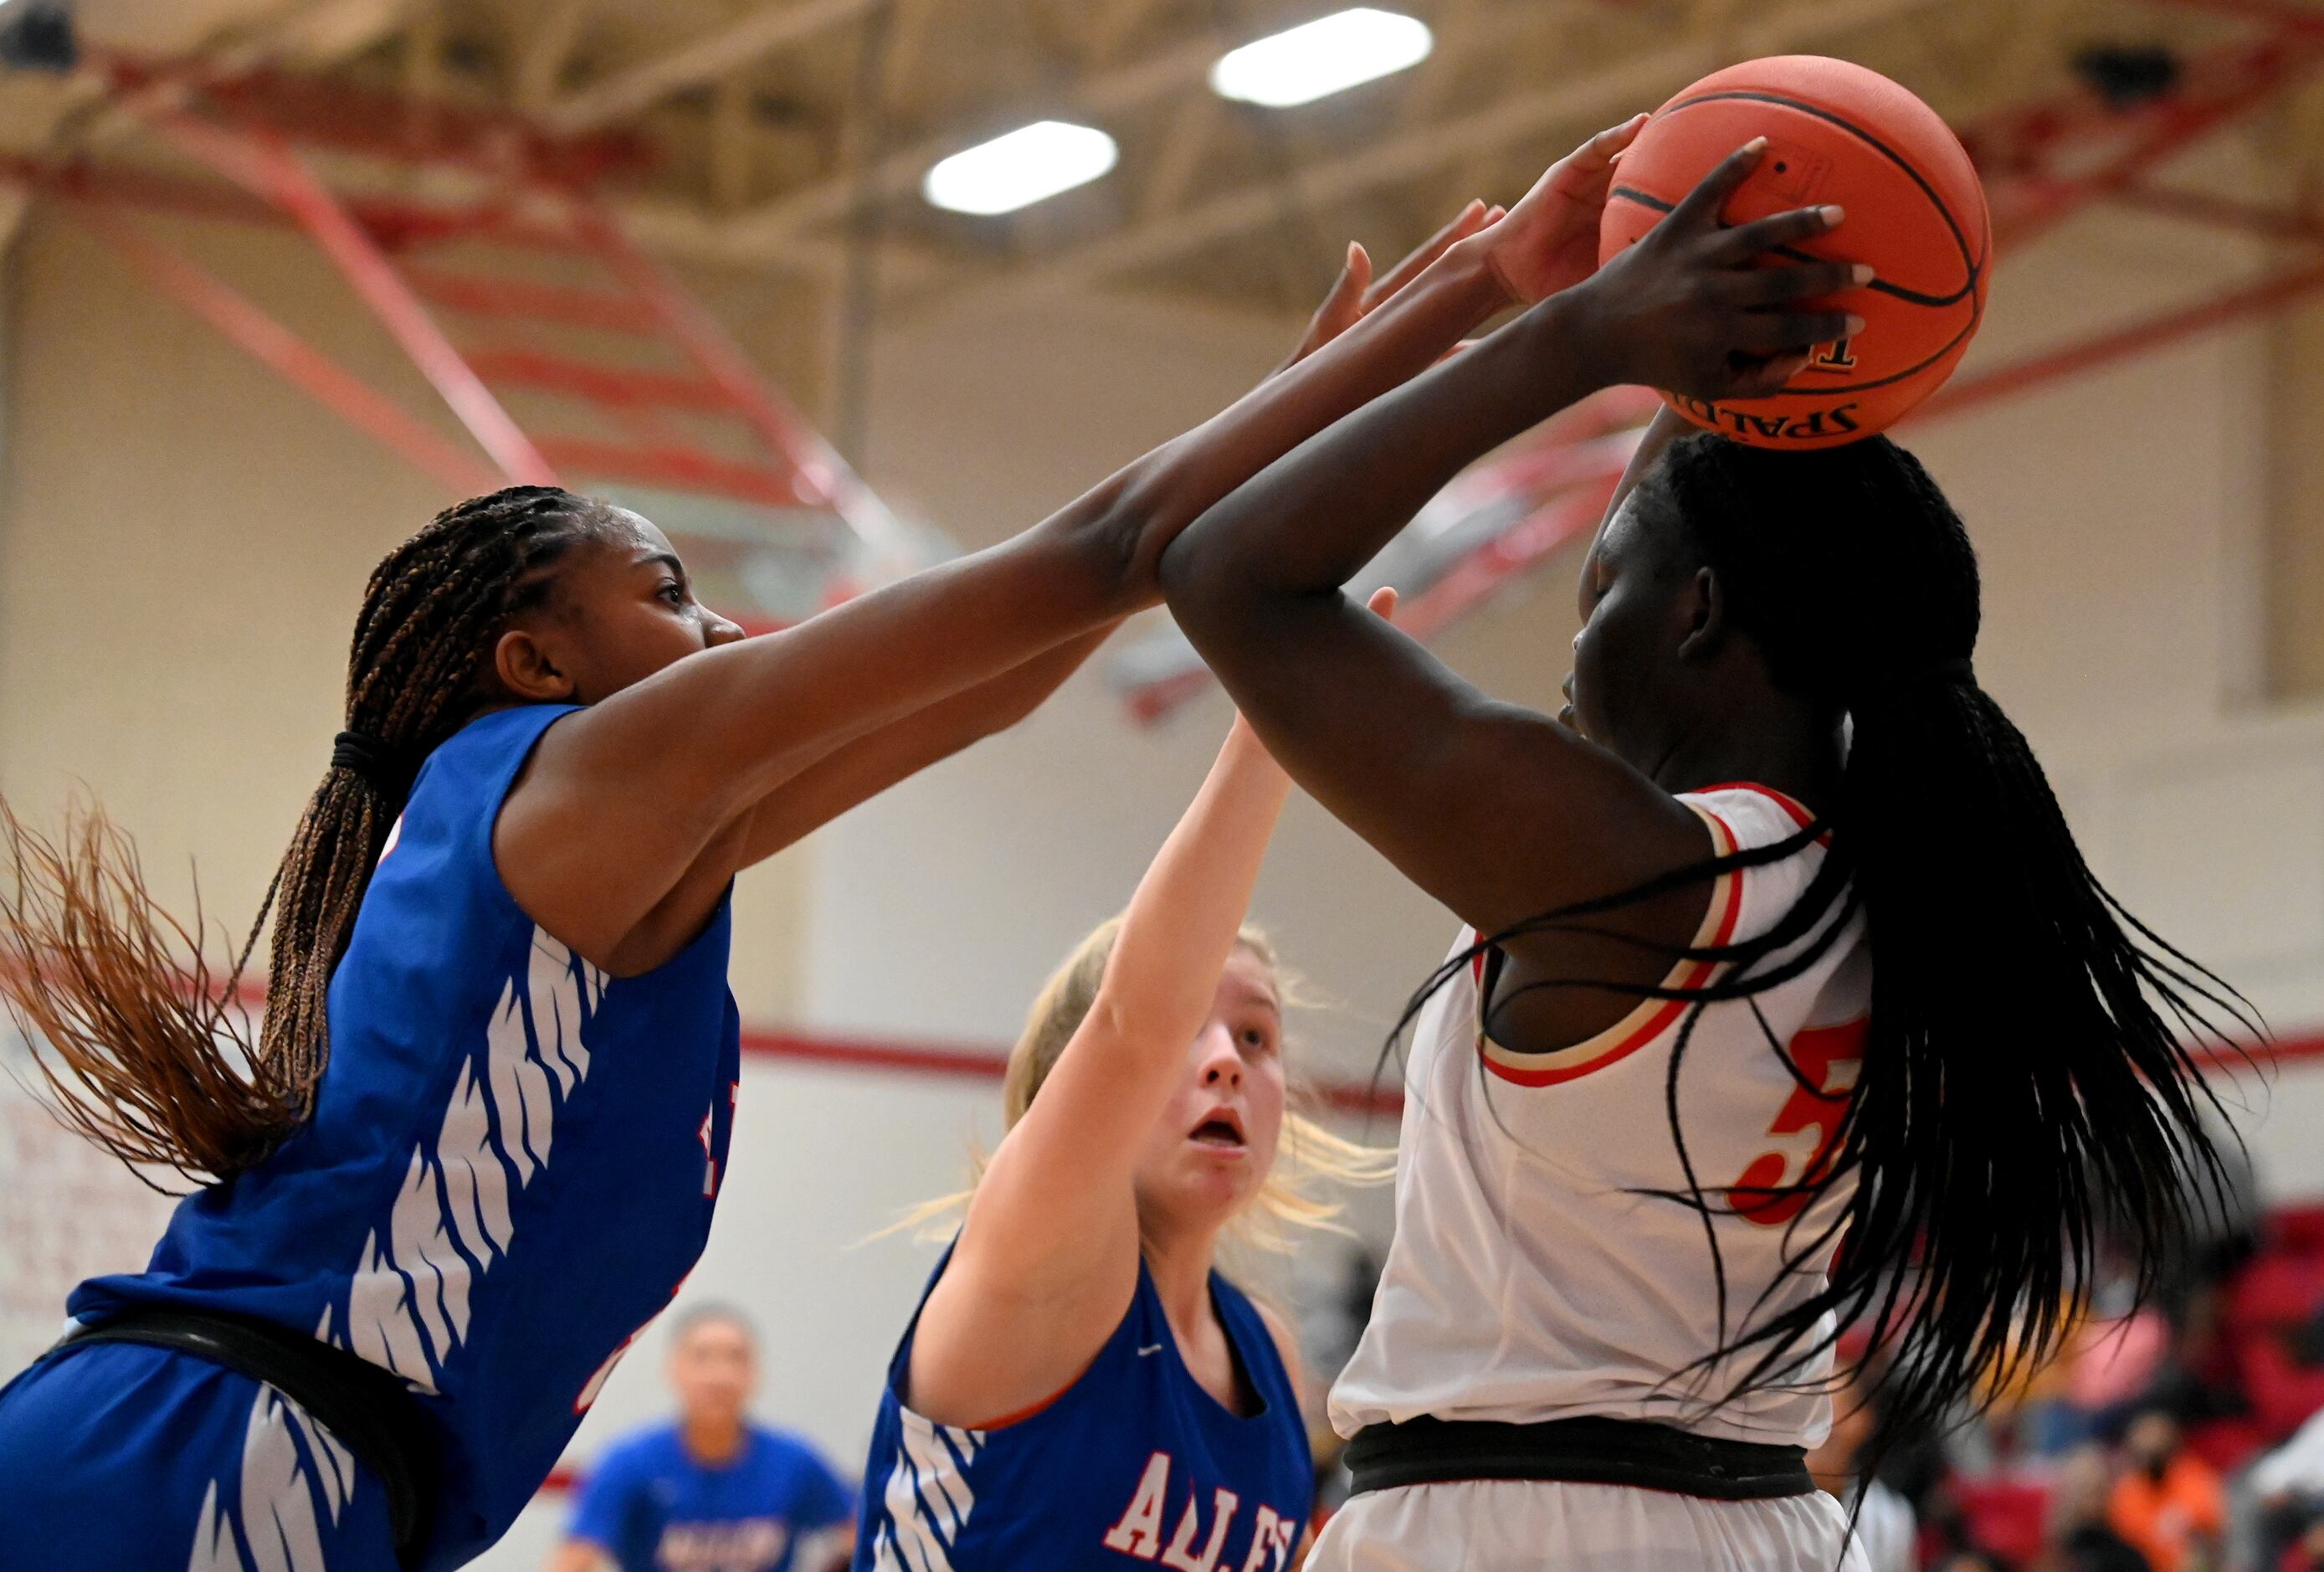 South Grand Prairie’s Nxerro Maluw (5) rebounds the ball in front of Allen’s Alicia Mills...